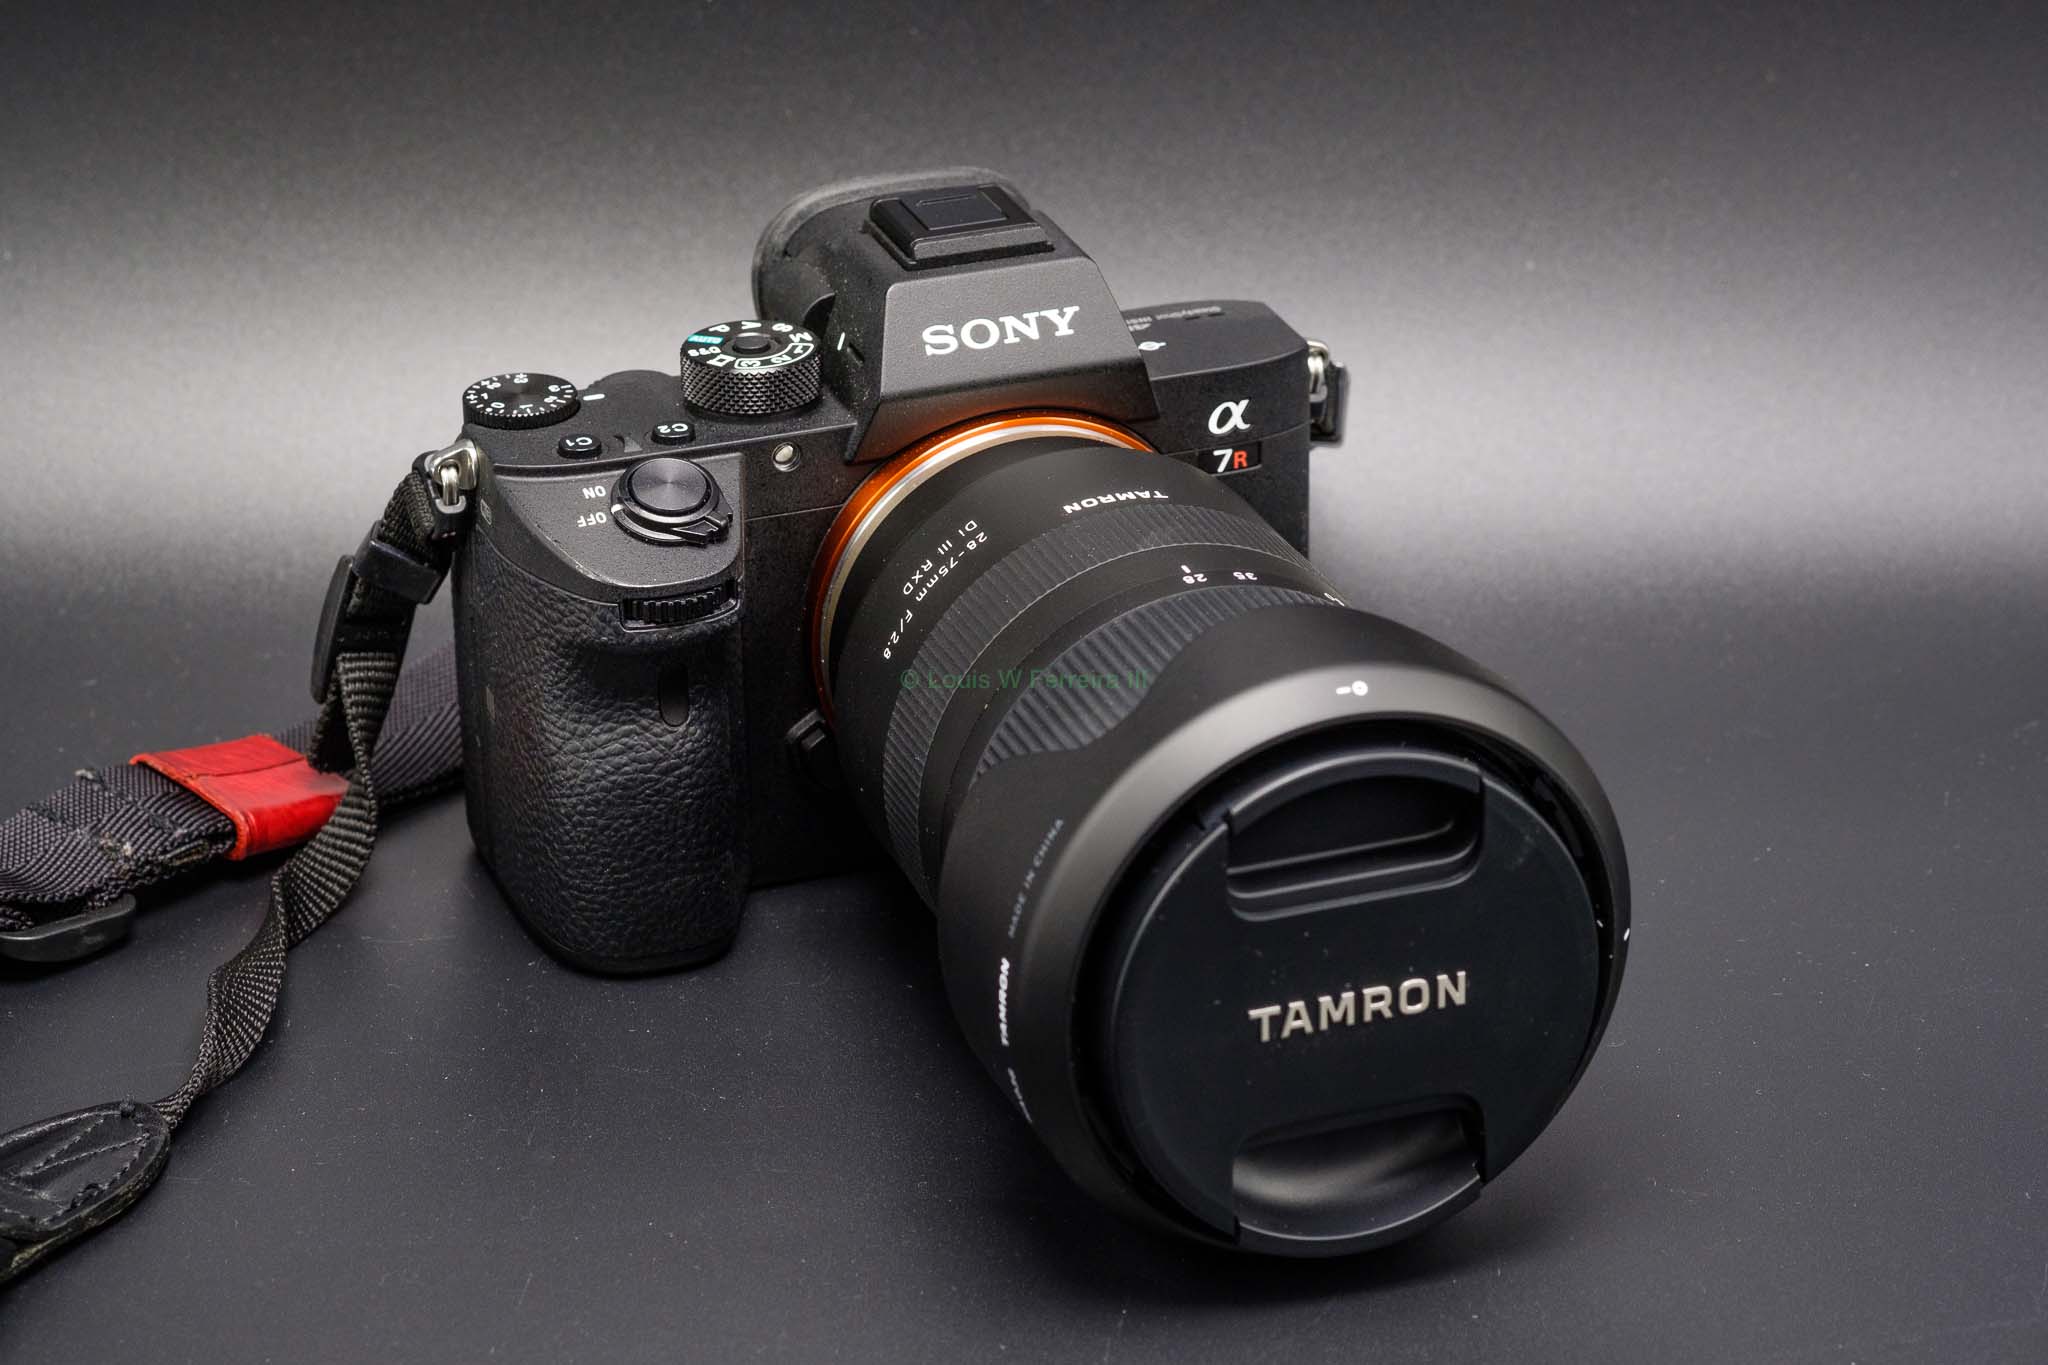 Tamron 28-75mm f/2.8 Di III RXD FE Compared to The Sony Zeiss 24